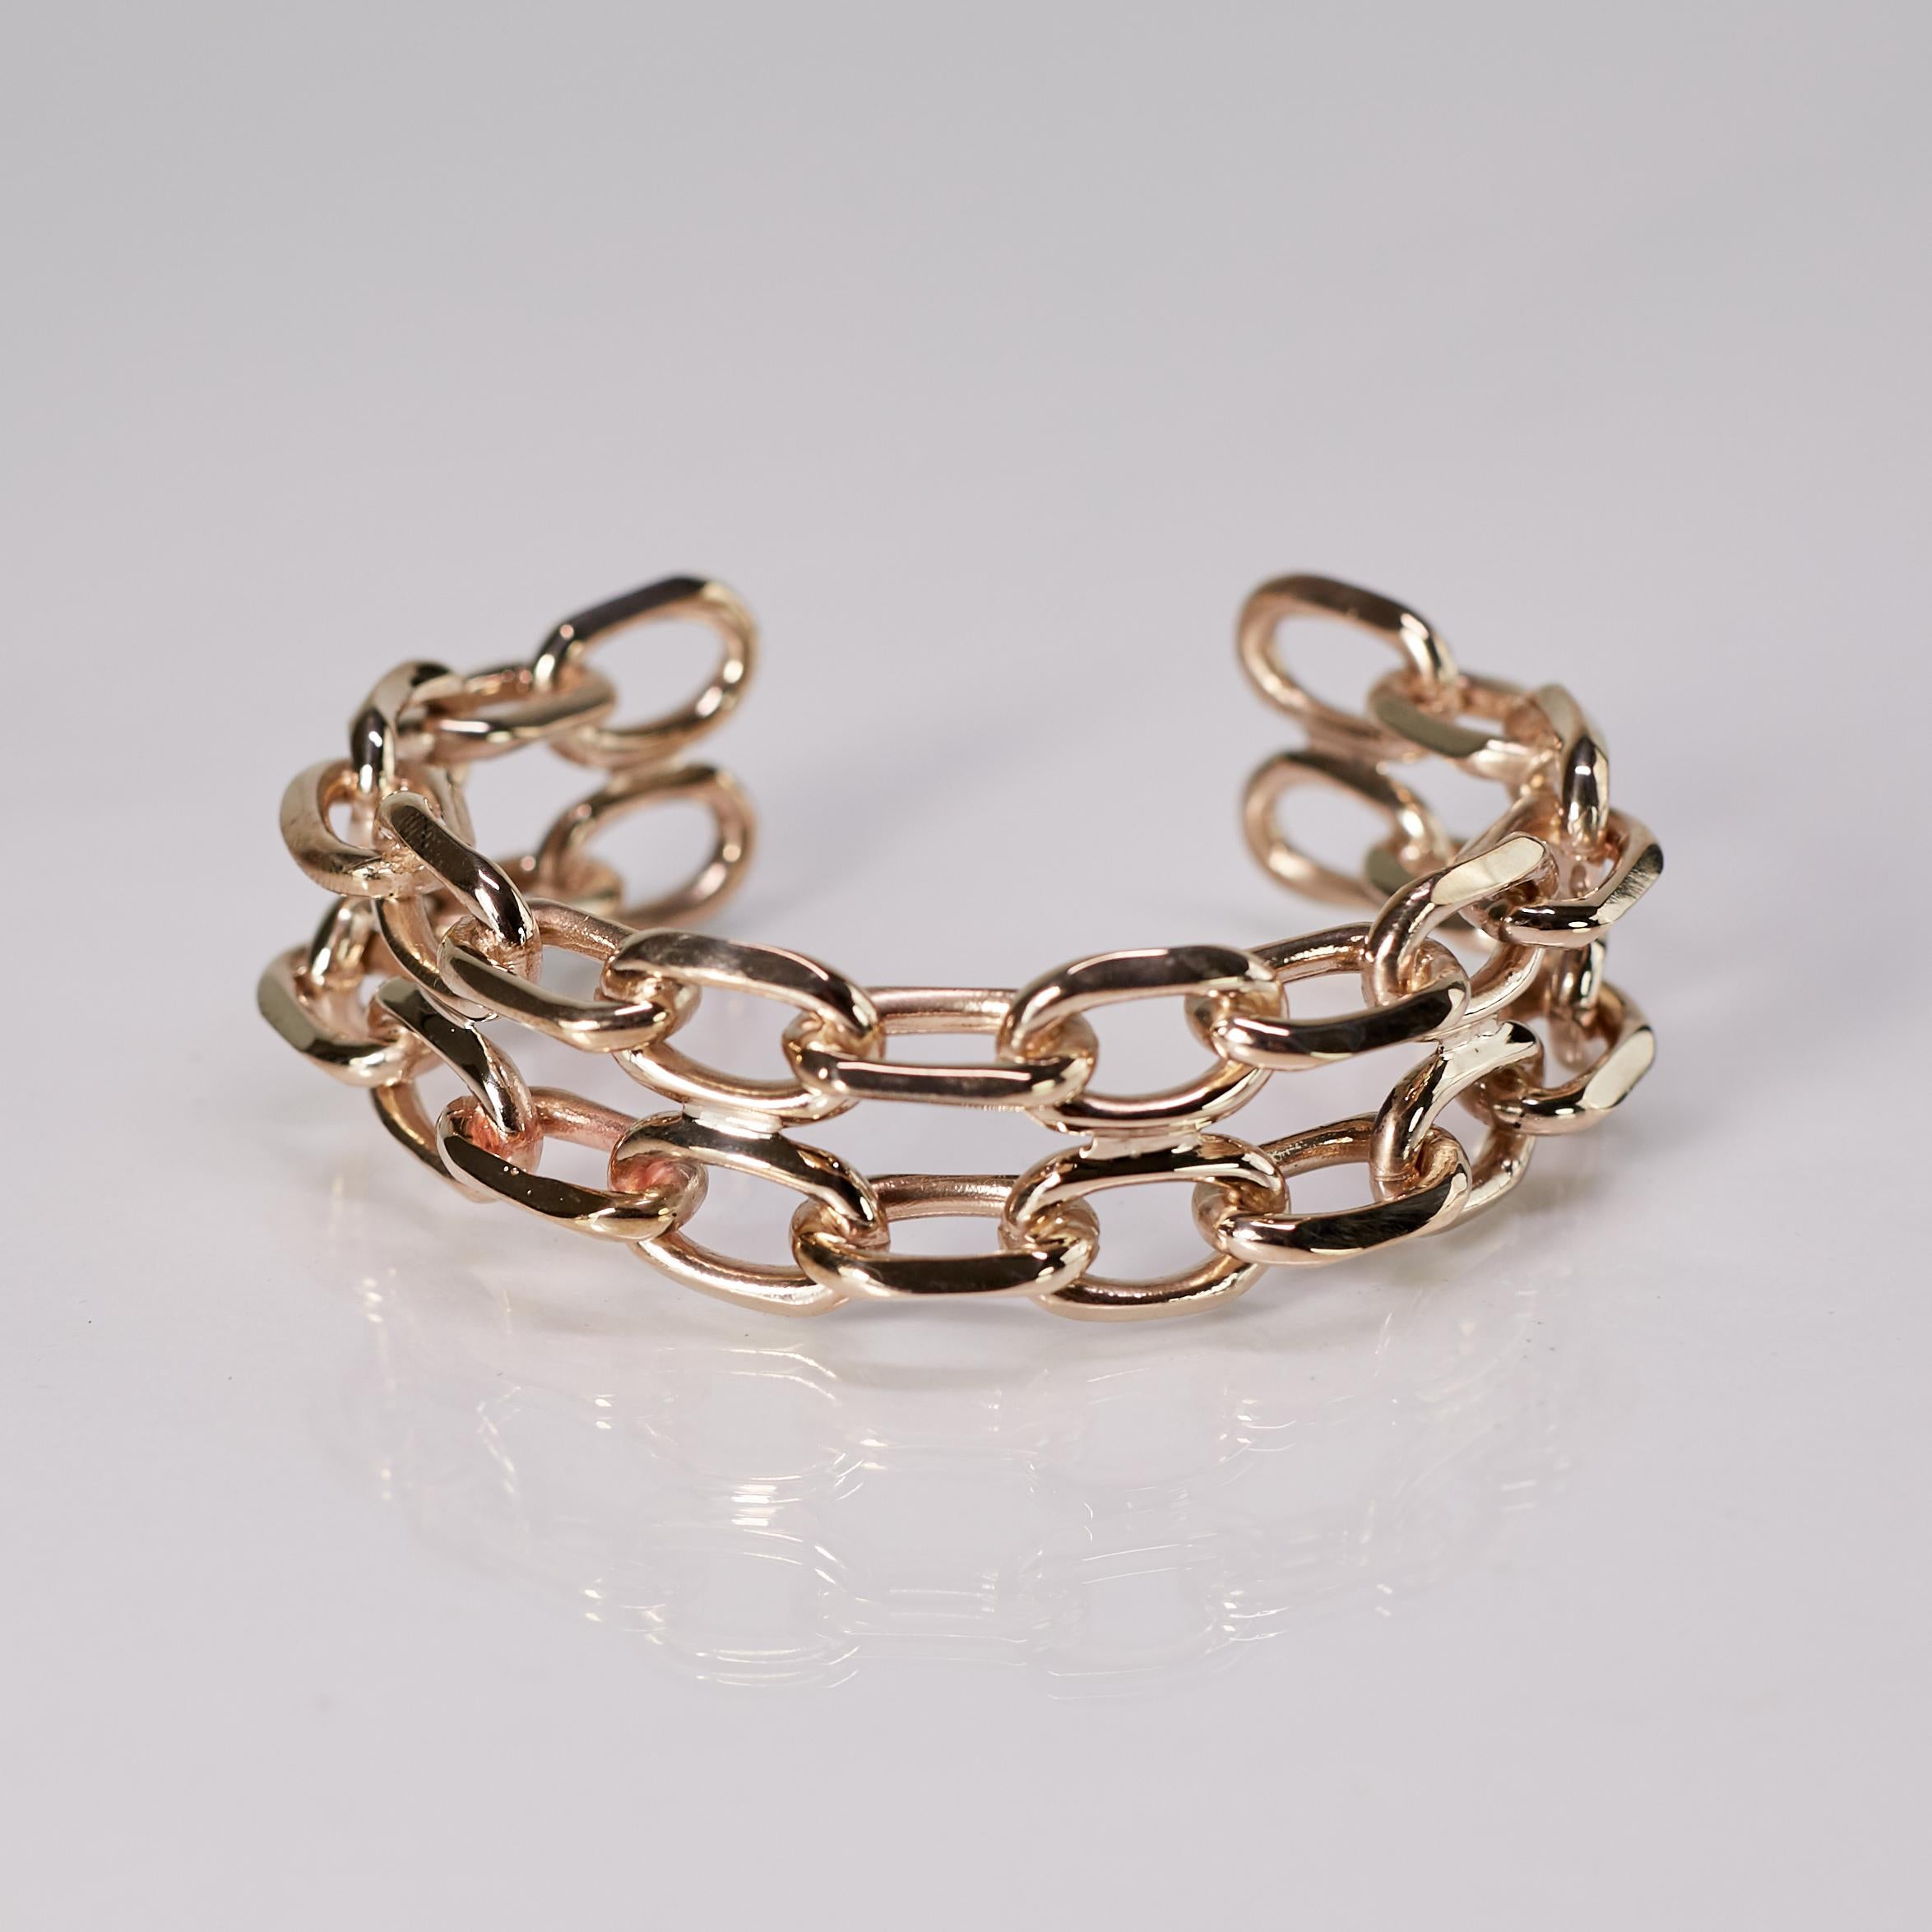 Chunky Chain Cuff Bangle Bracelet Bronze J Dauphin In New Condition For Sale In Los Angeles, CA